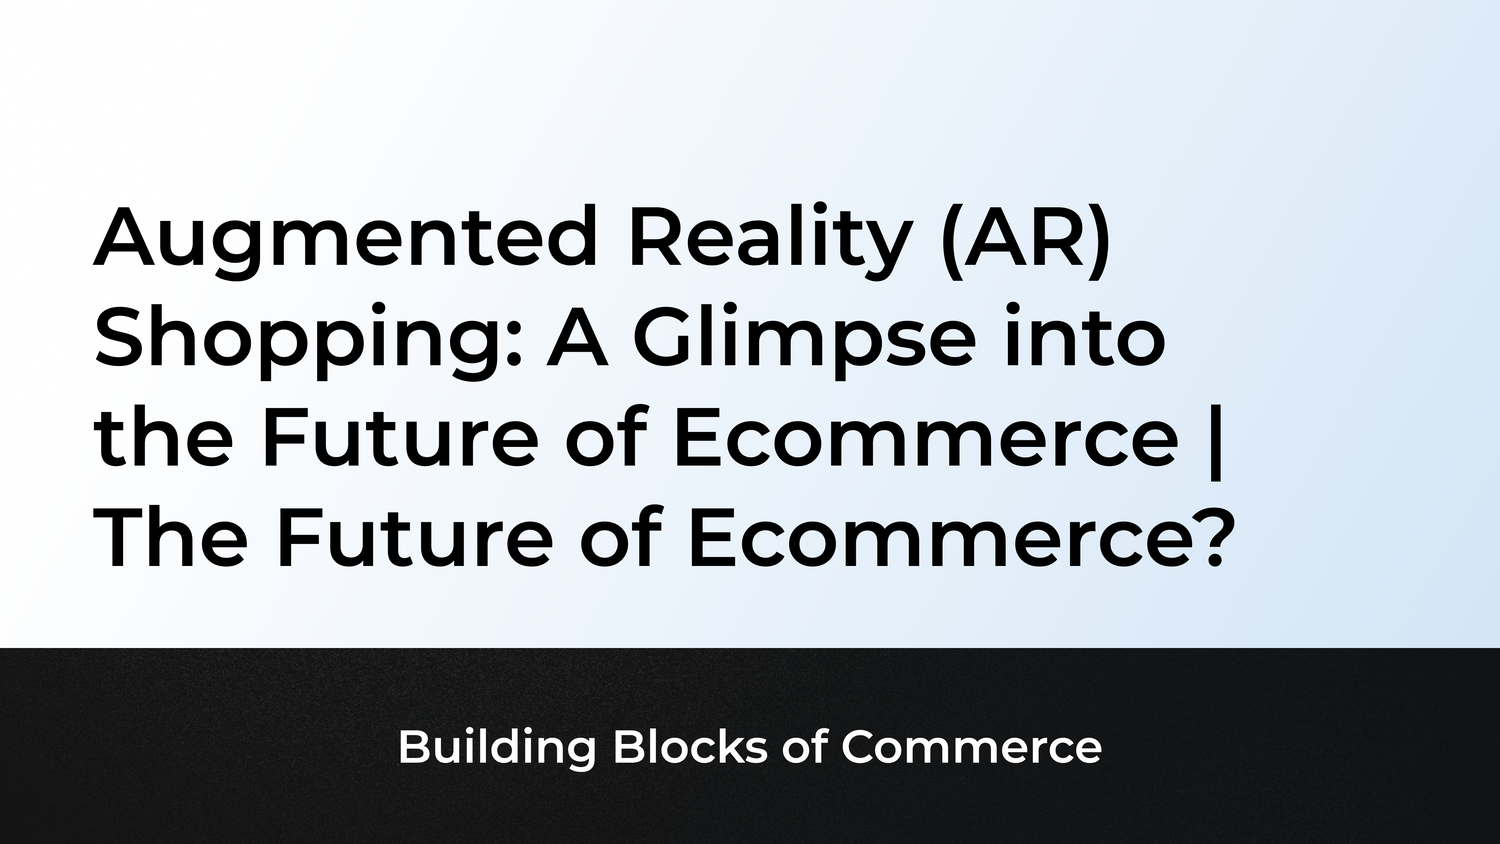 Augmented Reality (AR) Shopping: A Glimpse into the Future of Ecommerce | The Future of Ecommerce?